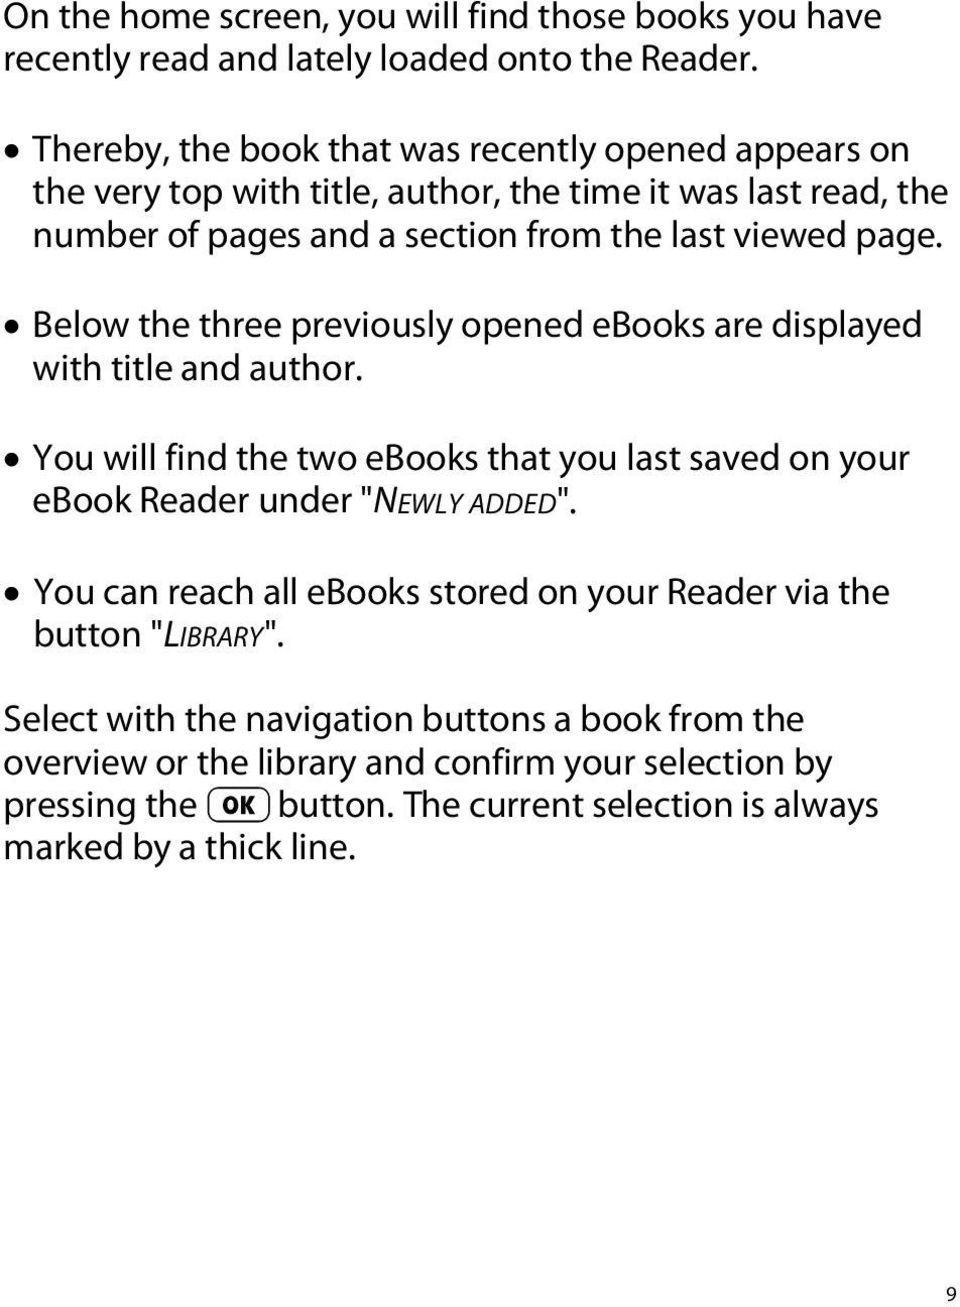 Below the three previously opened ebooks are displayed with title and author. You will find the two ebooks that you last saved on your ebook Reader under "NEWLY ADDED".